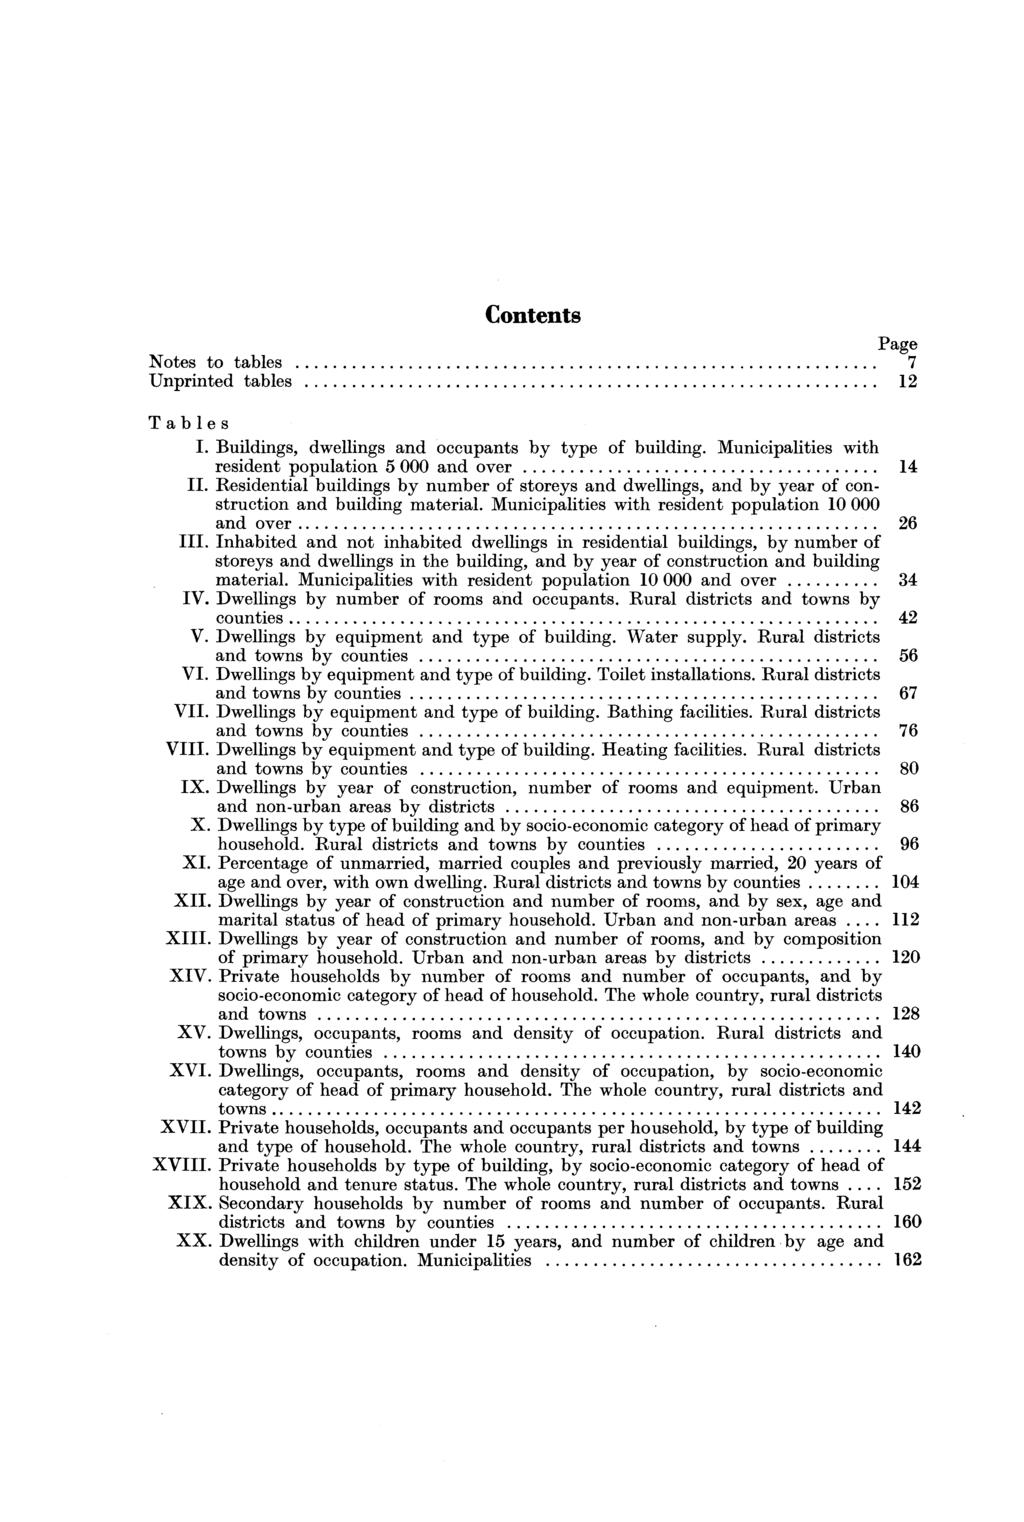 Contents Page Notes to tables Unprinted tables Tables I. Buildings, dwellings and occupants by type of building. Municipalities with resident population 000 and over II.